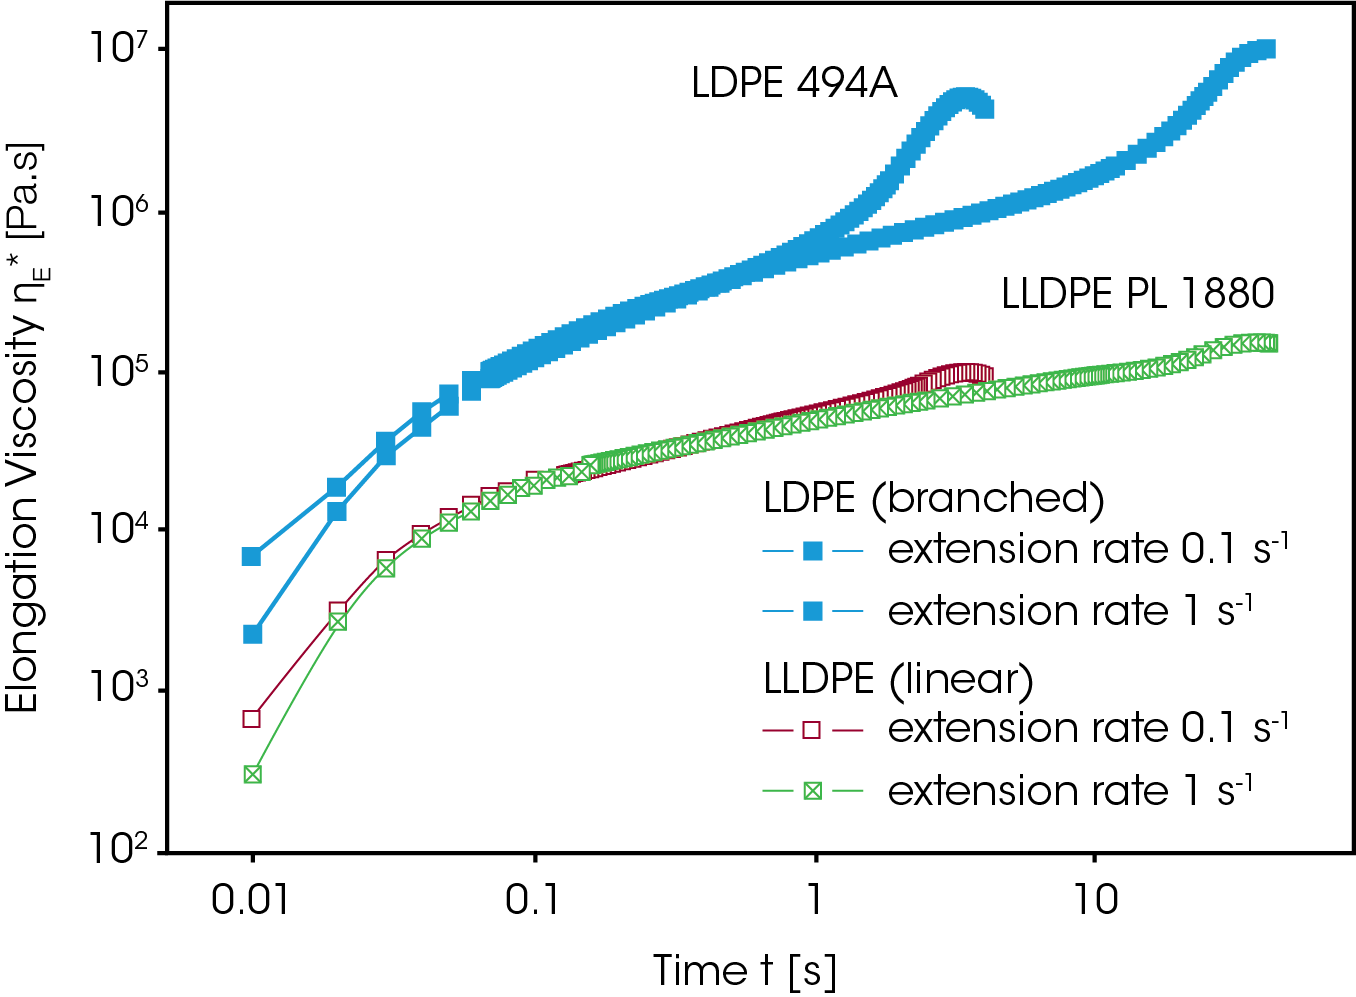 Figure 7. Elongation viscosity of LDPE (branched) and LLDPE (linear) show pronounced differences at high total strains. This strain hardening effect is a characteristic feature of long chain branching.